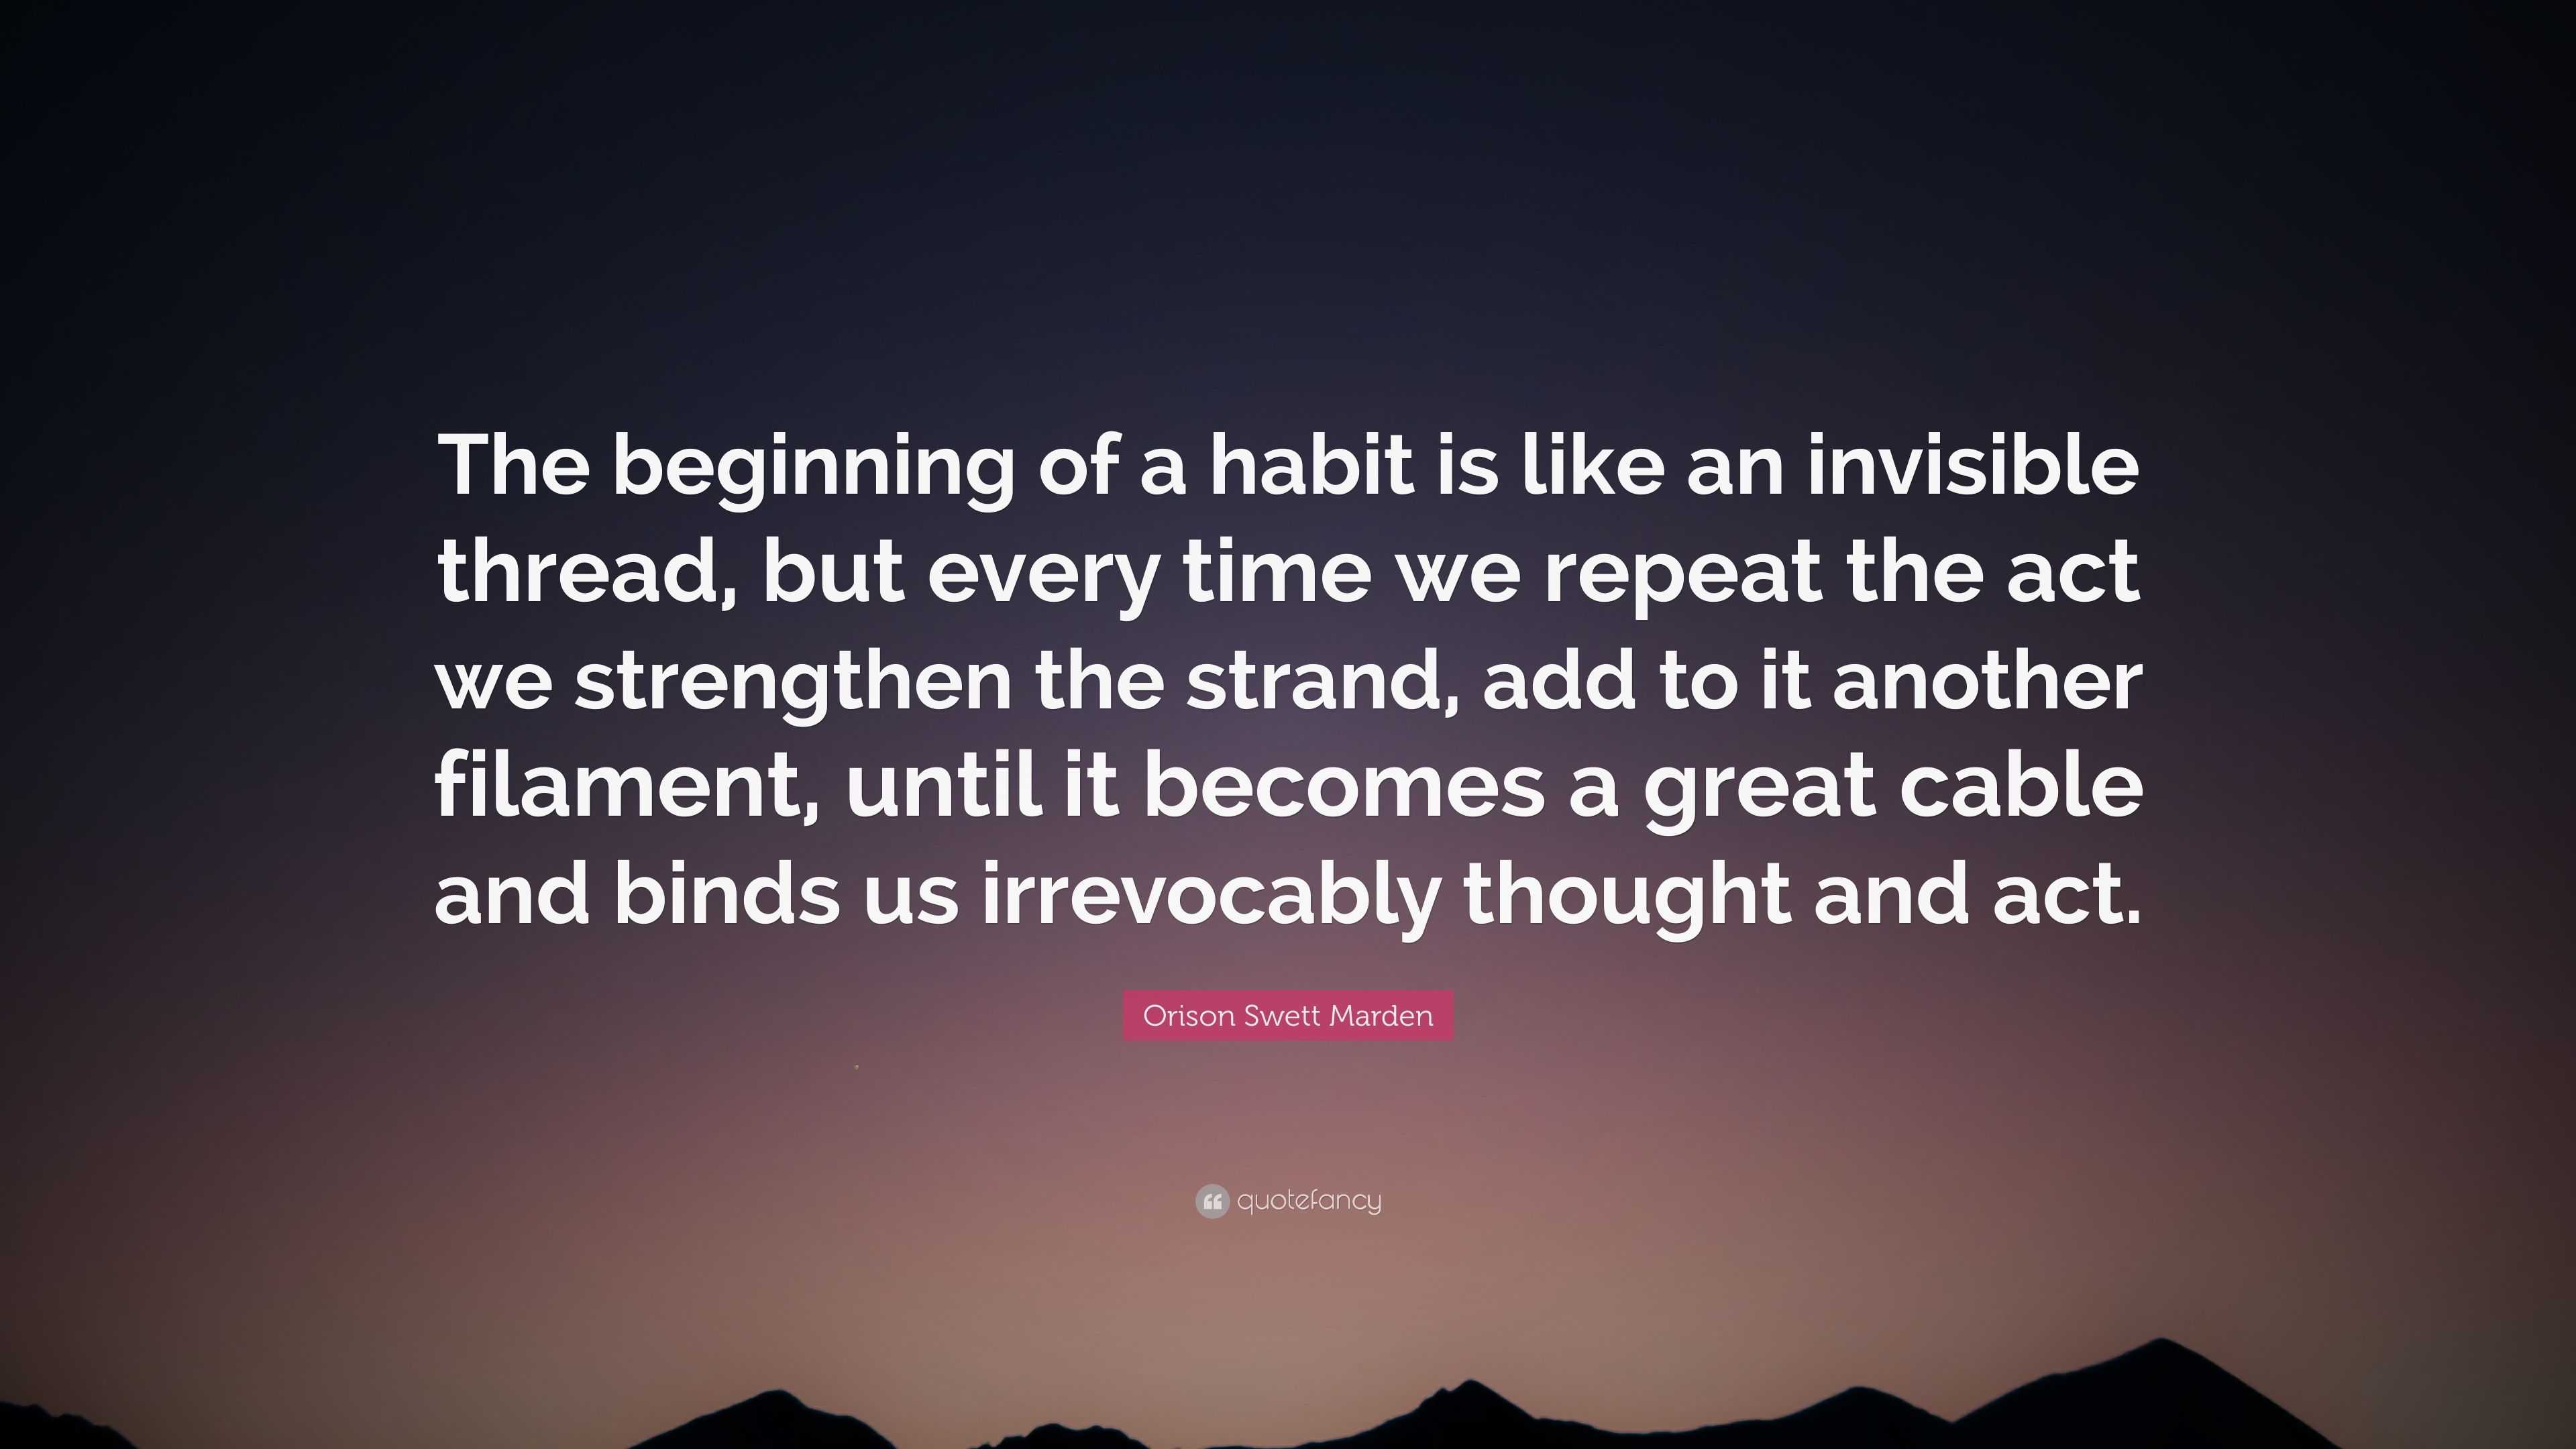 Orison Swett Marden Quote: “The beginning of a habit is like an invisible  thread, but every time we repeat the act we strengthen the strand, add to  ”